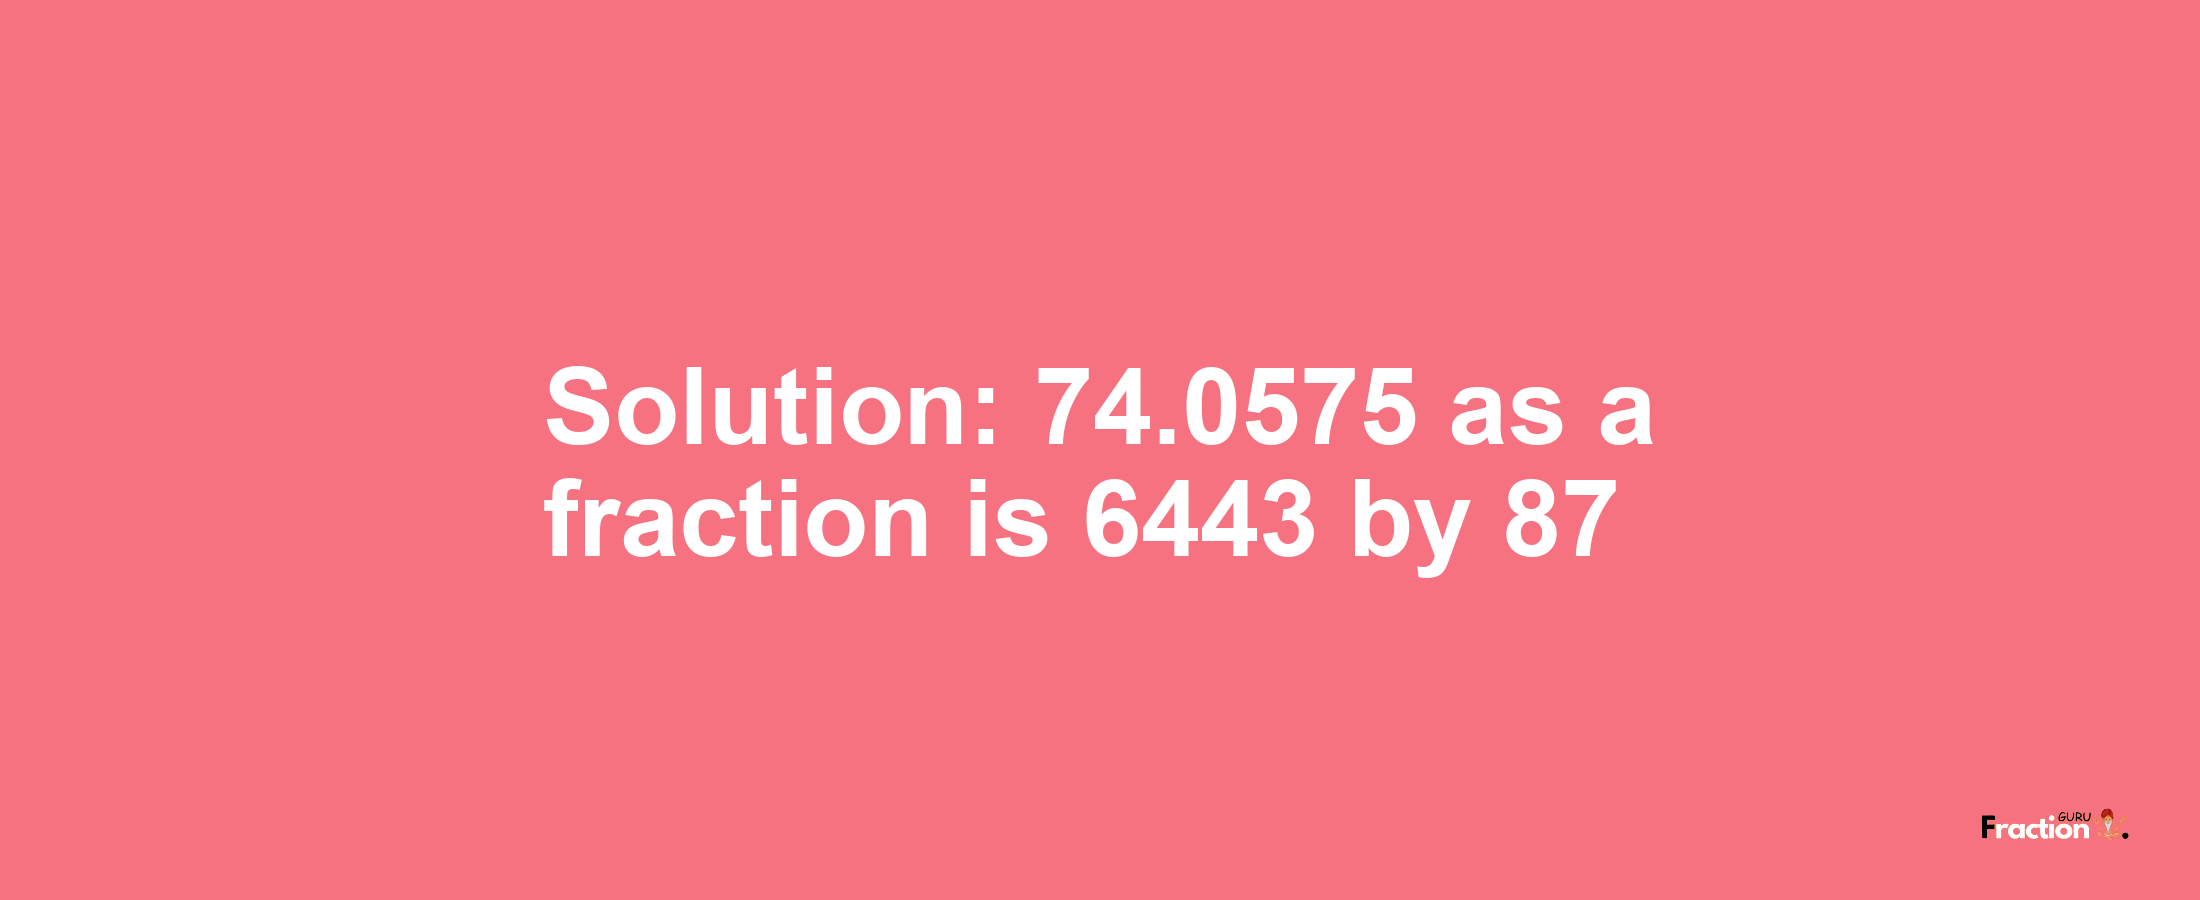 Solution:74.0575 as a fraction is 6443/87